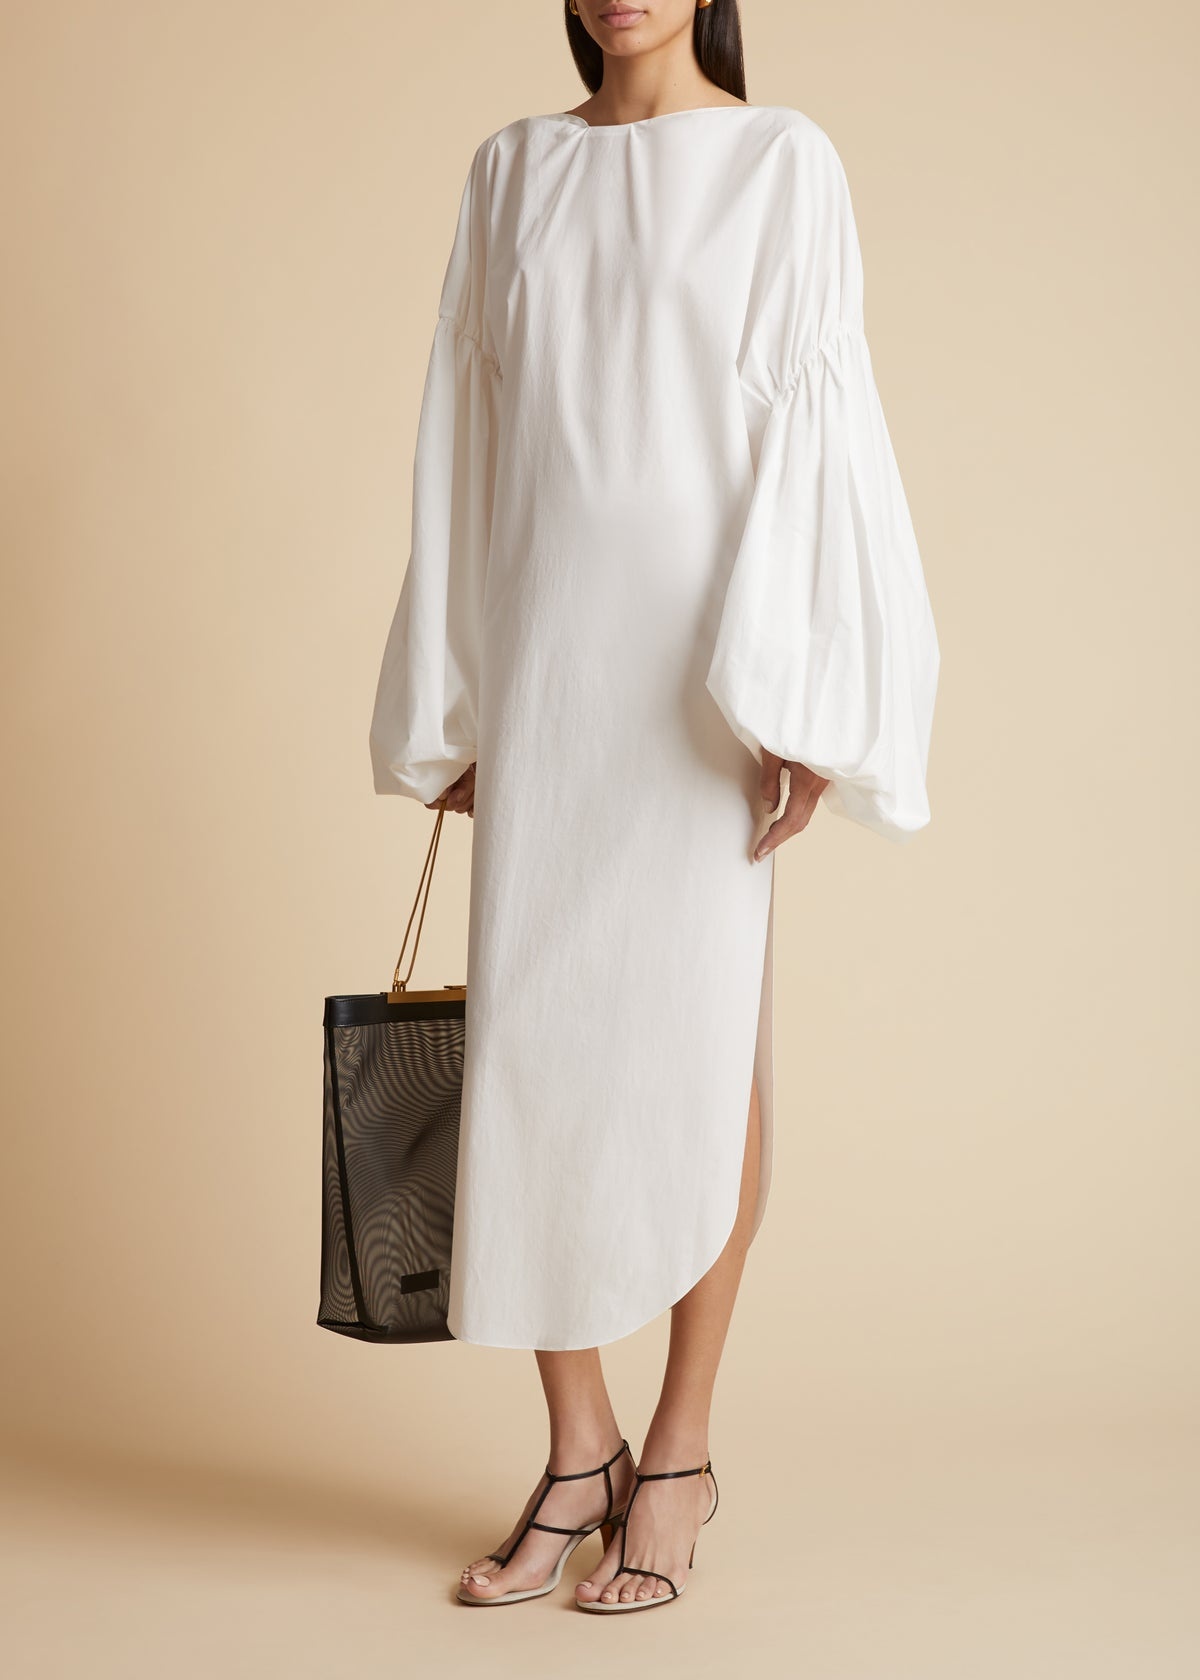 The Zelma Dress in White - 1